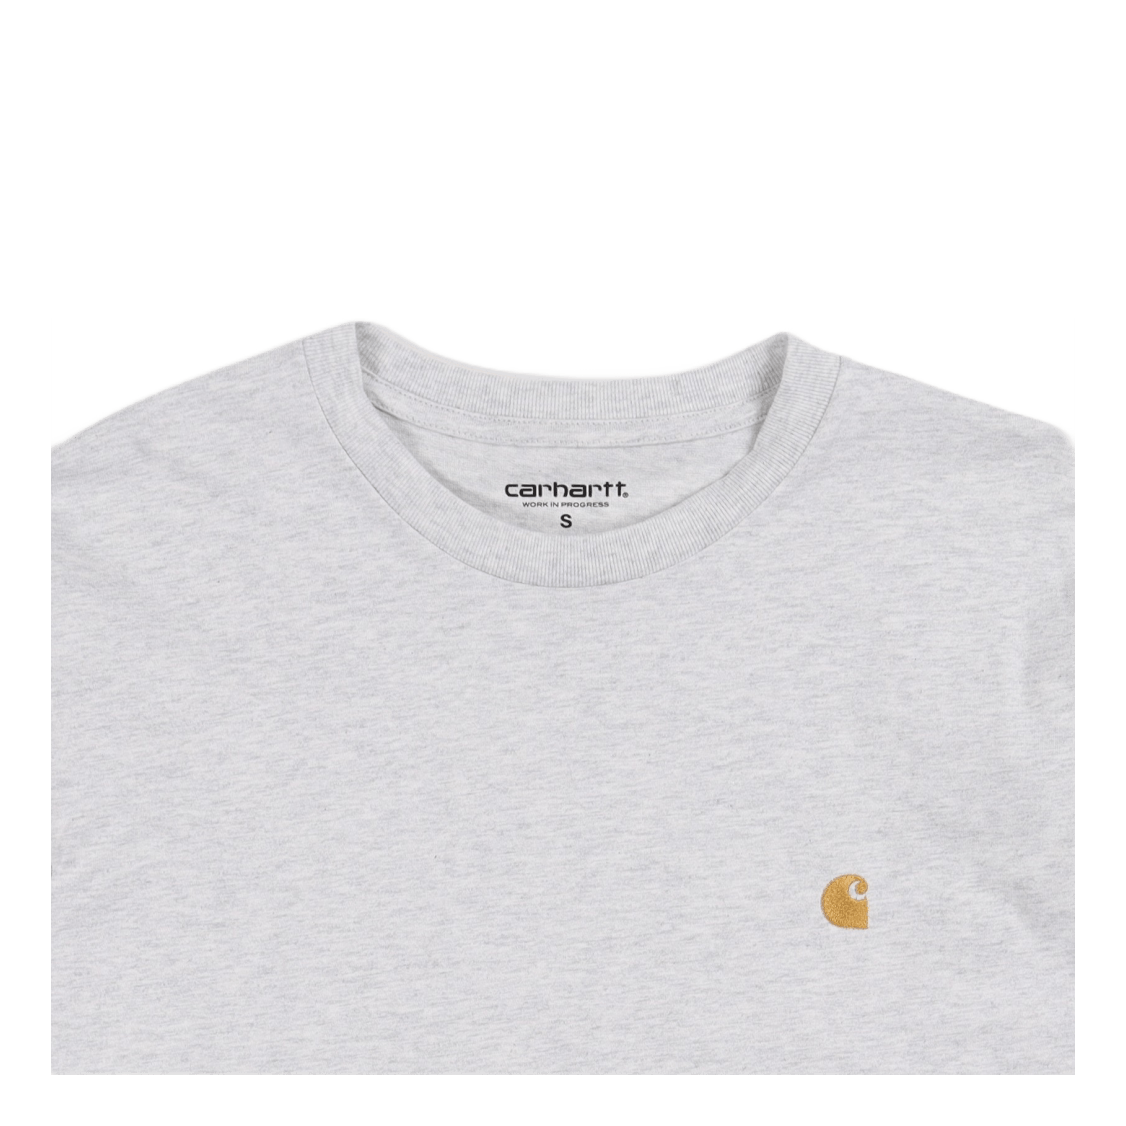 L/s Chase T-shirt Ash Heather / Gold